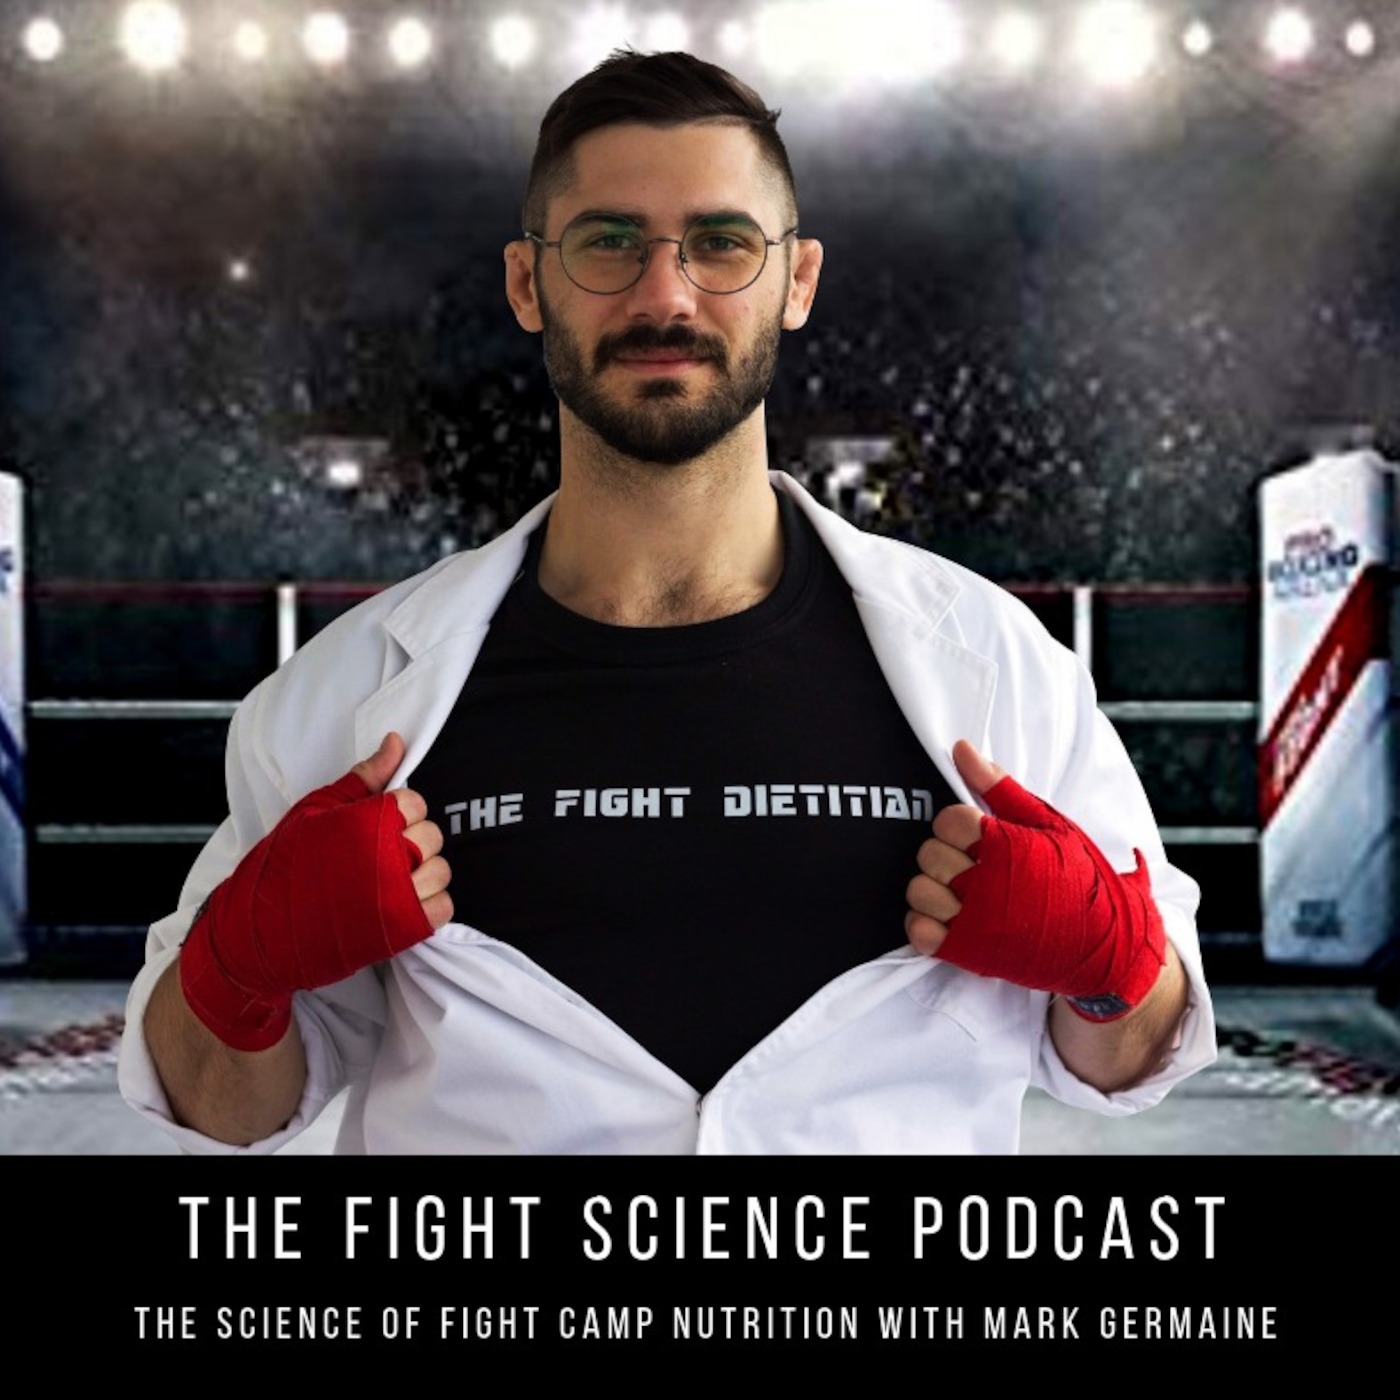 Breaking Down the Science of Fight Camp Nutrition with Mark Germaine